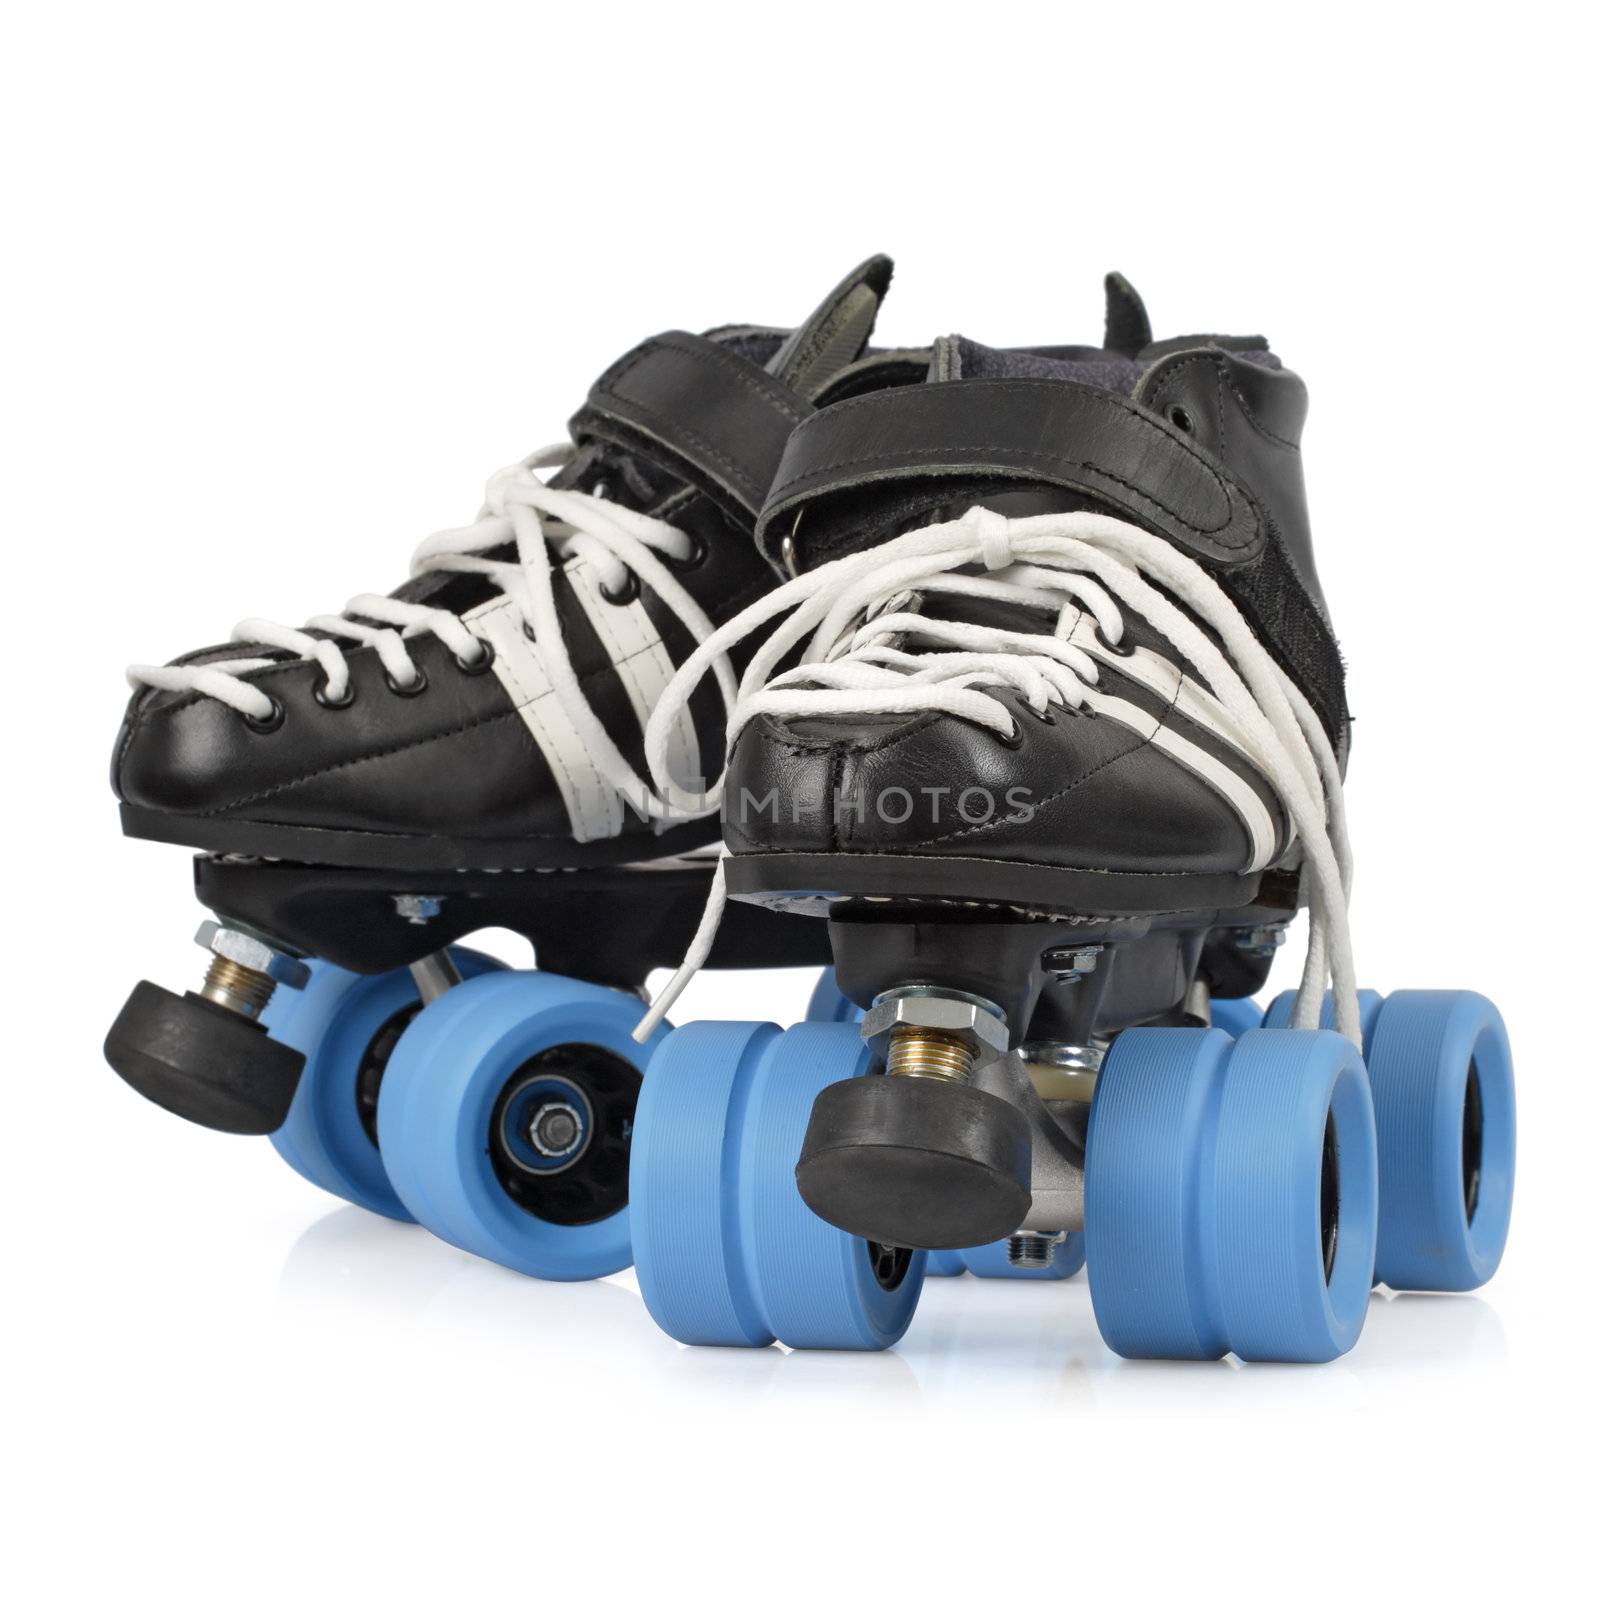 Photo of Roller Derby quad skates. Focus is on the front skate.
